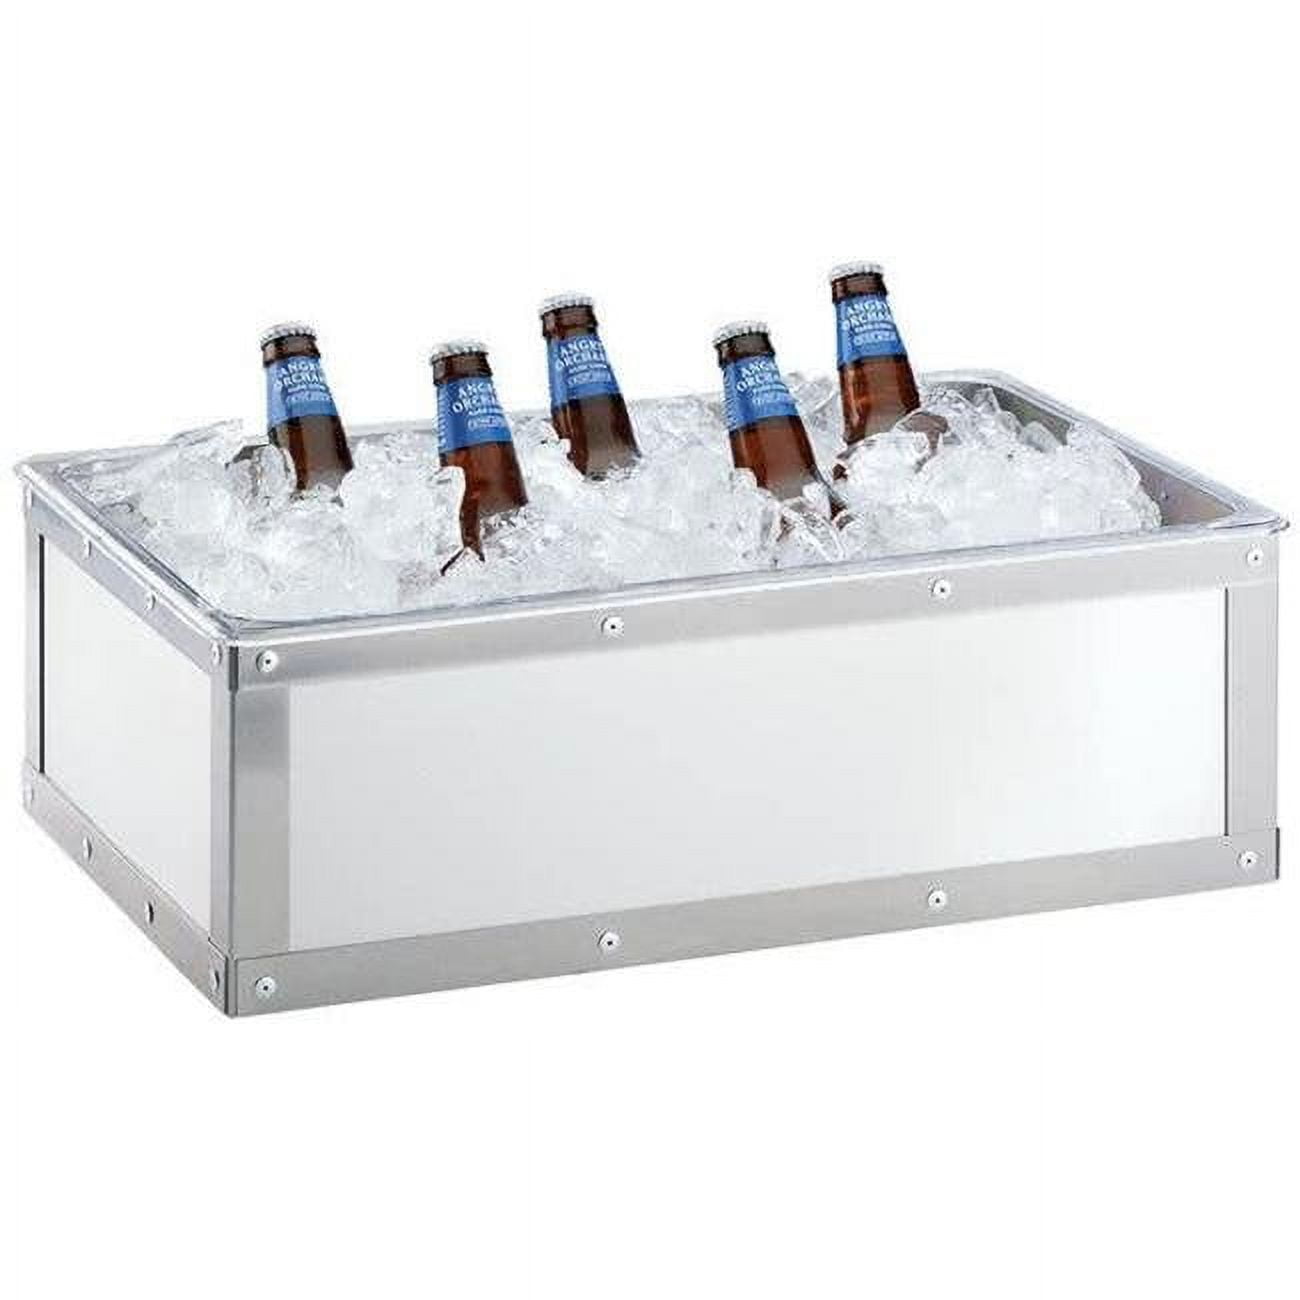 Picture of Cal Mil 3395-12-55 Urban 12 x 20 in. Ice Housing - Stainless Steel - Silver